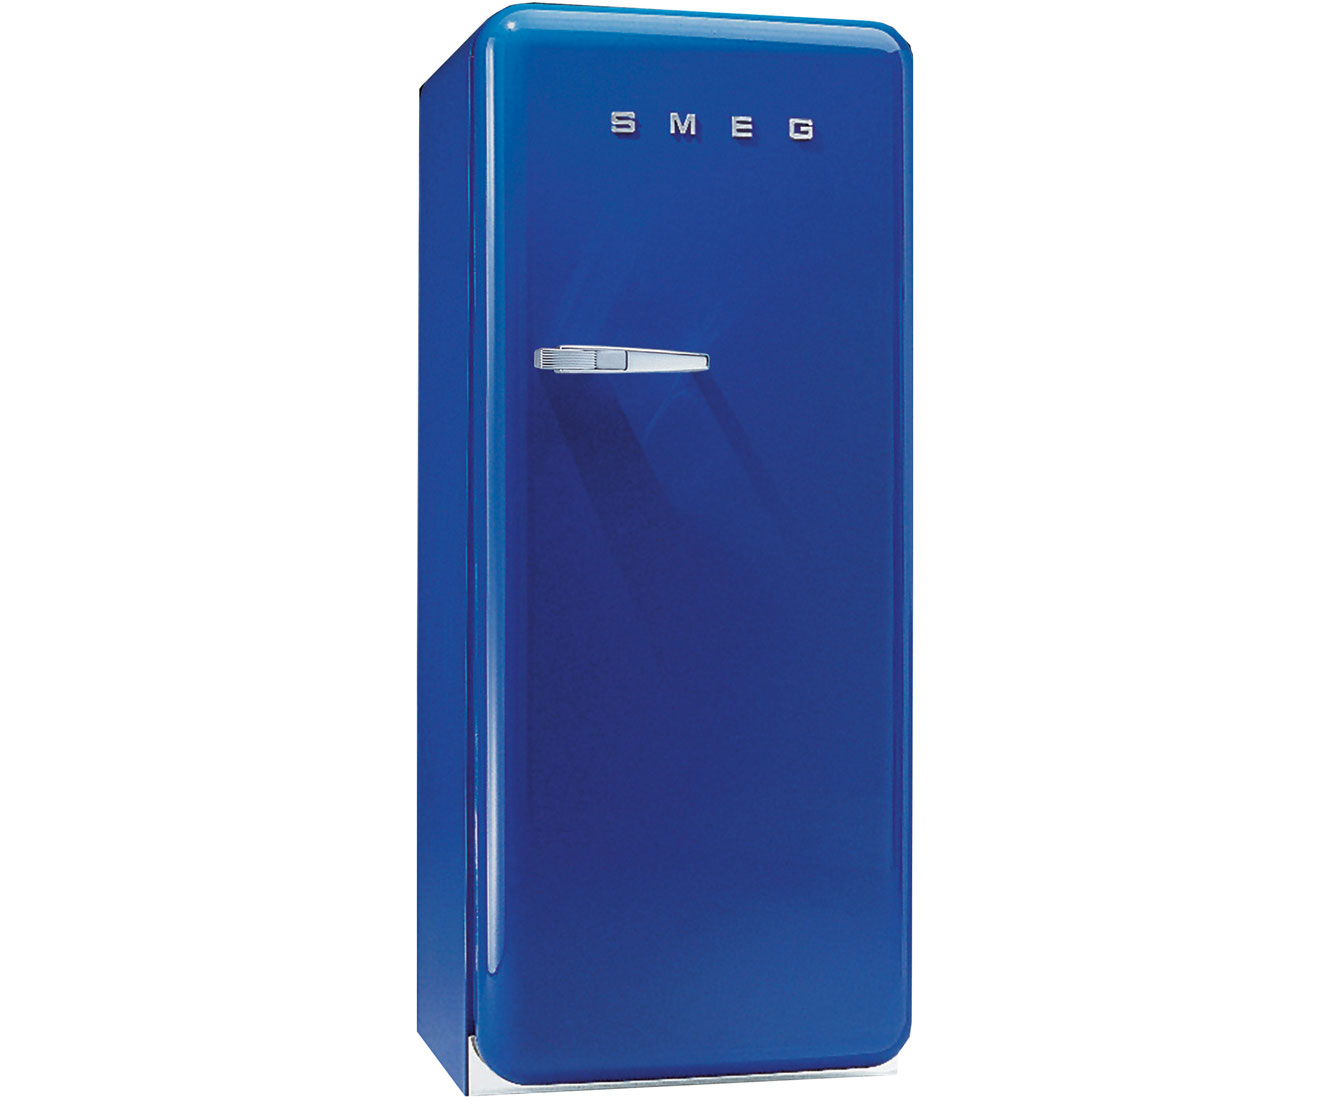 Smeg Right Hand Hinge FAB28QBL1 Free Standing Refrigerator in Blue